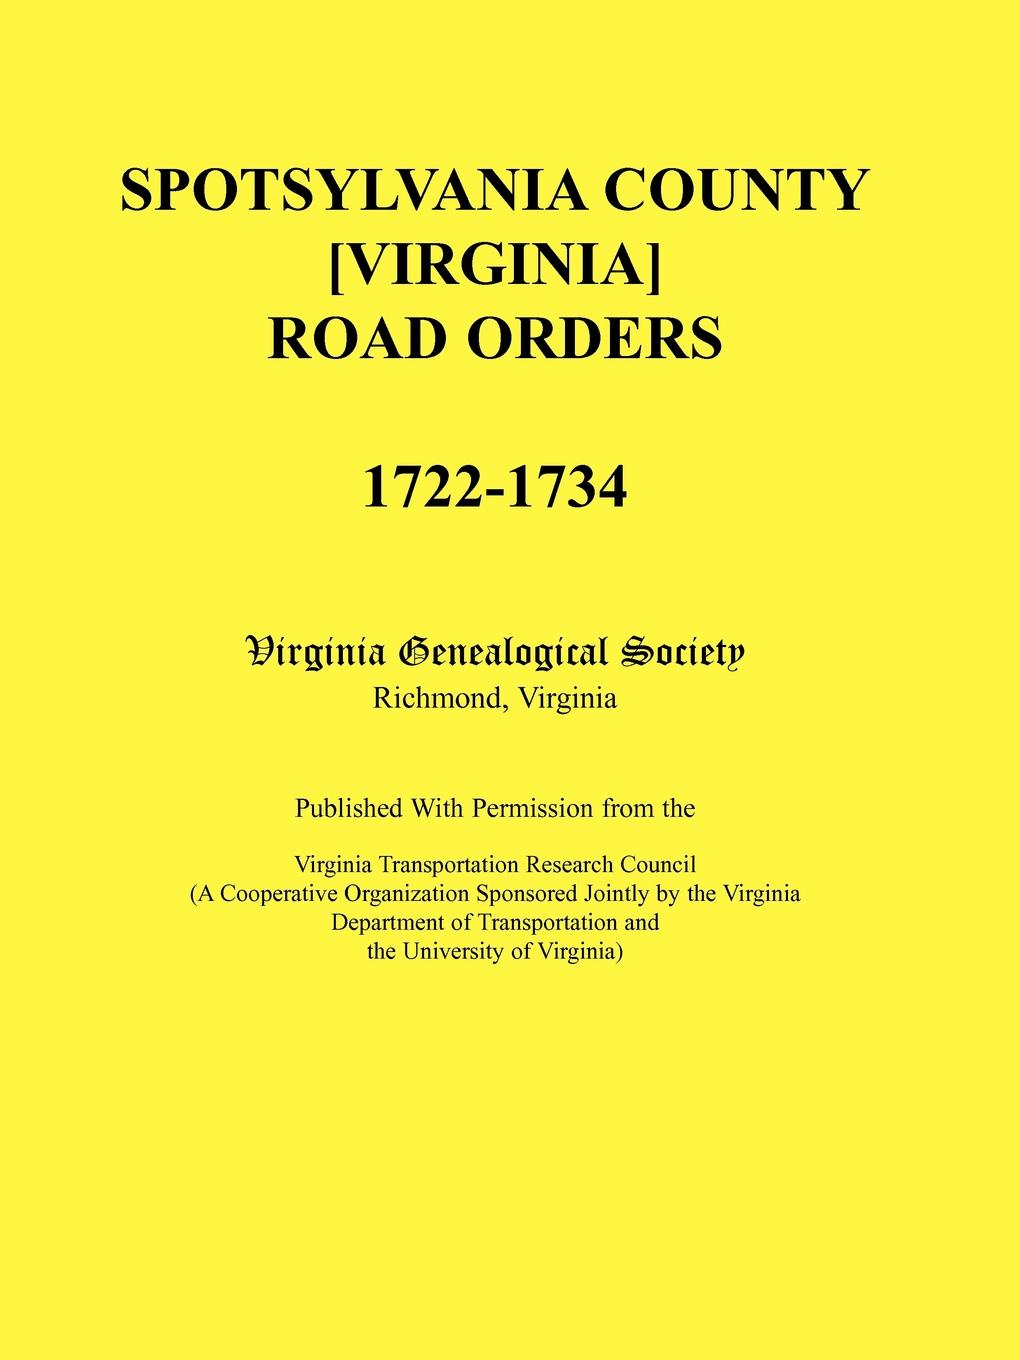 Spotsylvania County .Virginia. Road Orders, 1722-1734. Published With Permission from the Virginia Transportation Research Council (A Cooperative Organization Sponsored Jointly by the Virginia Department of Transportation and the University of Vir...